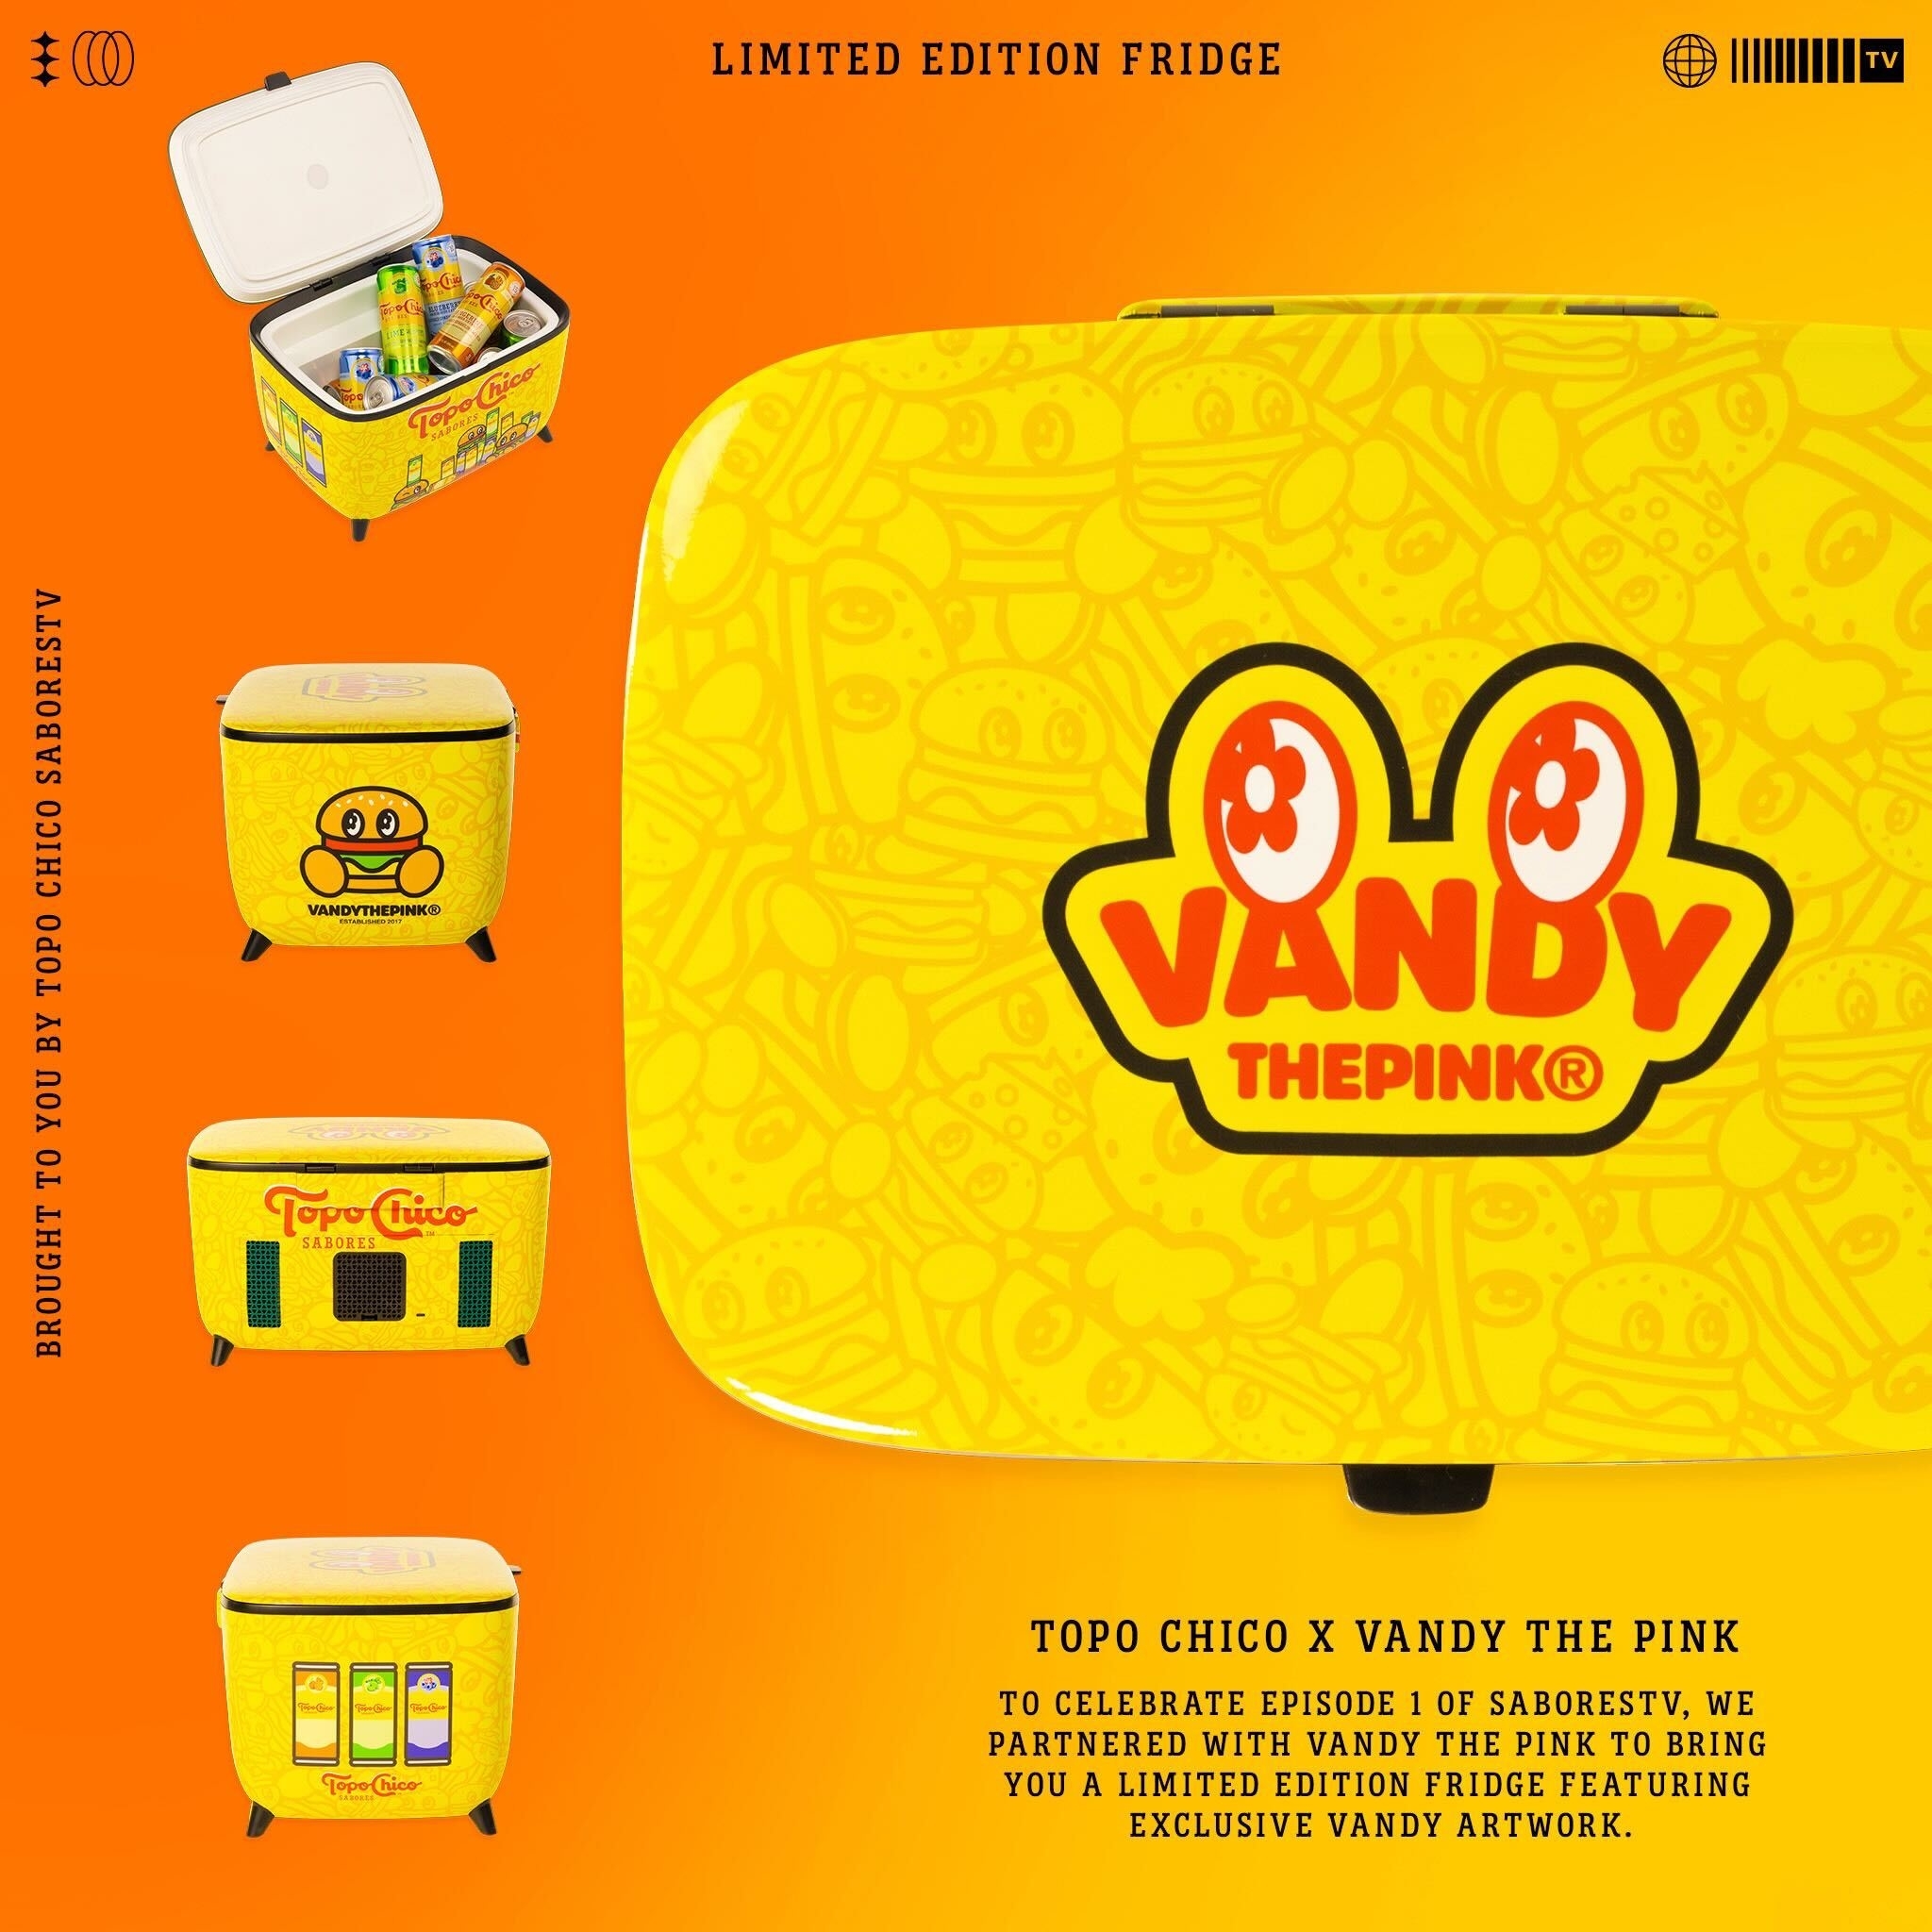 Promotional image for a limited edition fridge by Topo Chico x Vandy The Pink featuring exclusive Vandy artwork, including front and side views of the fridge design